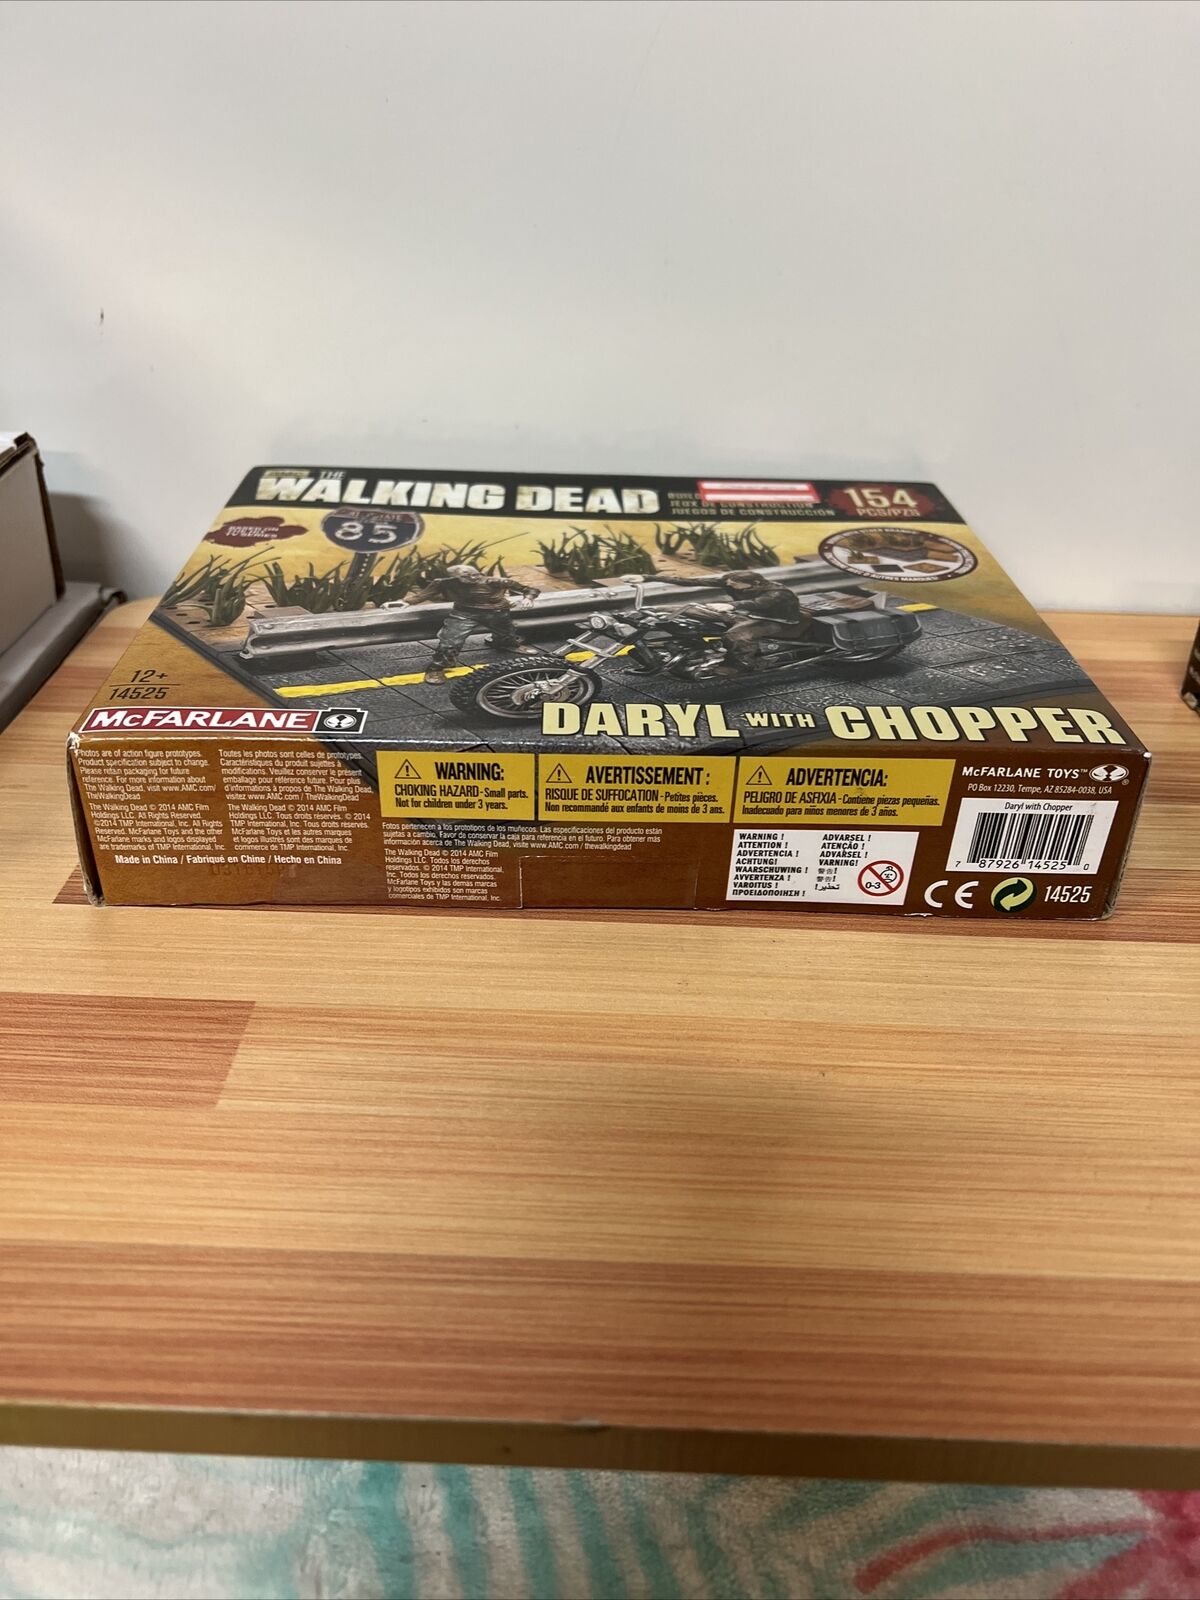 McFarlane Toys Building Sets The Walking Dead Daryl Dixon with Chopper FREE SHIP